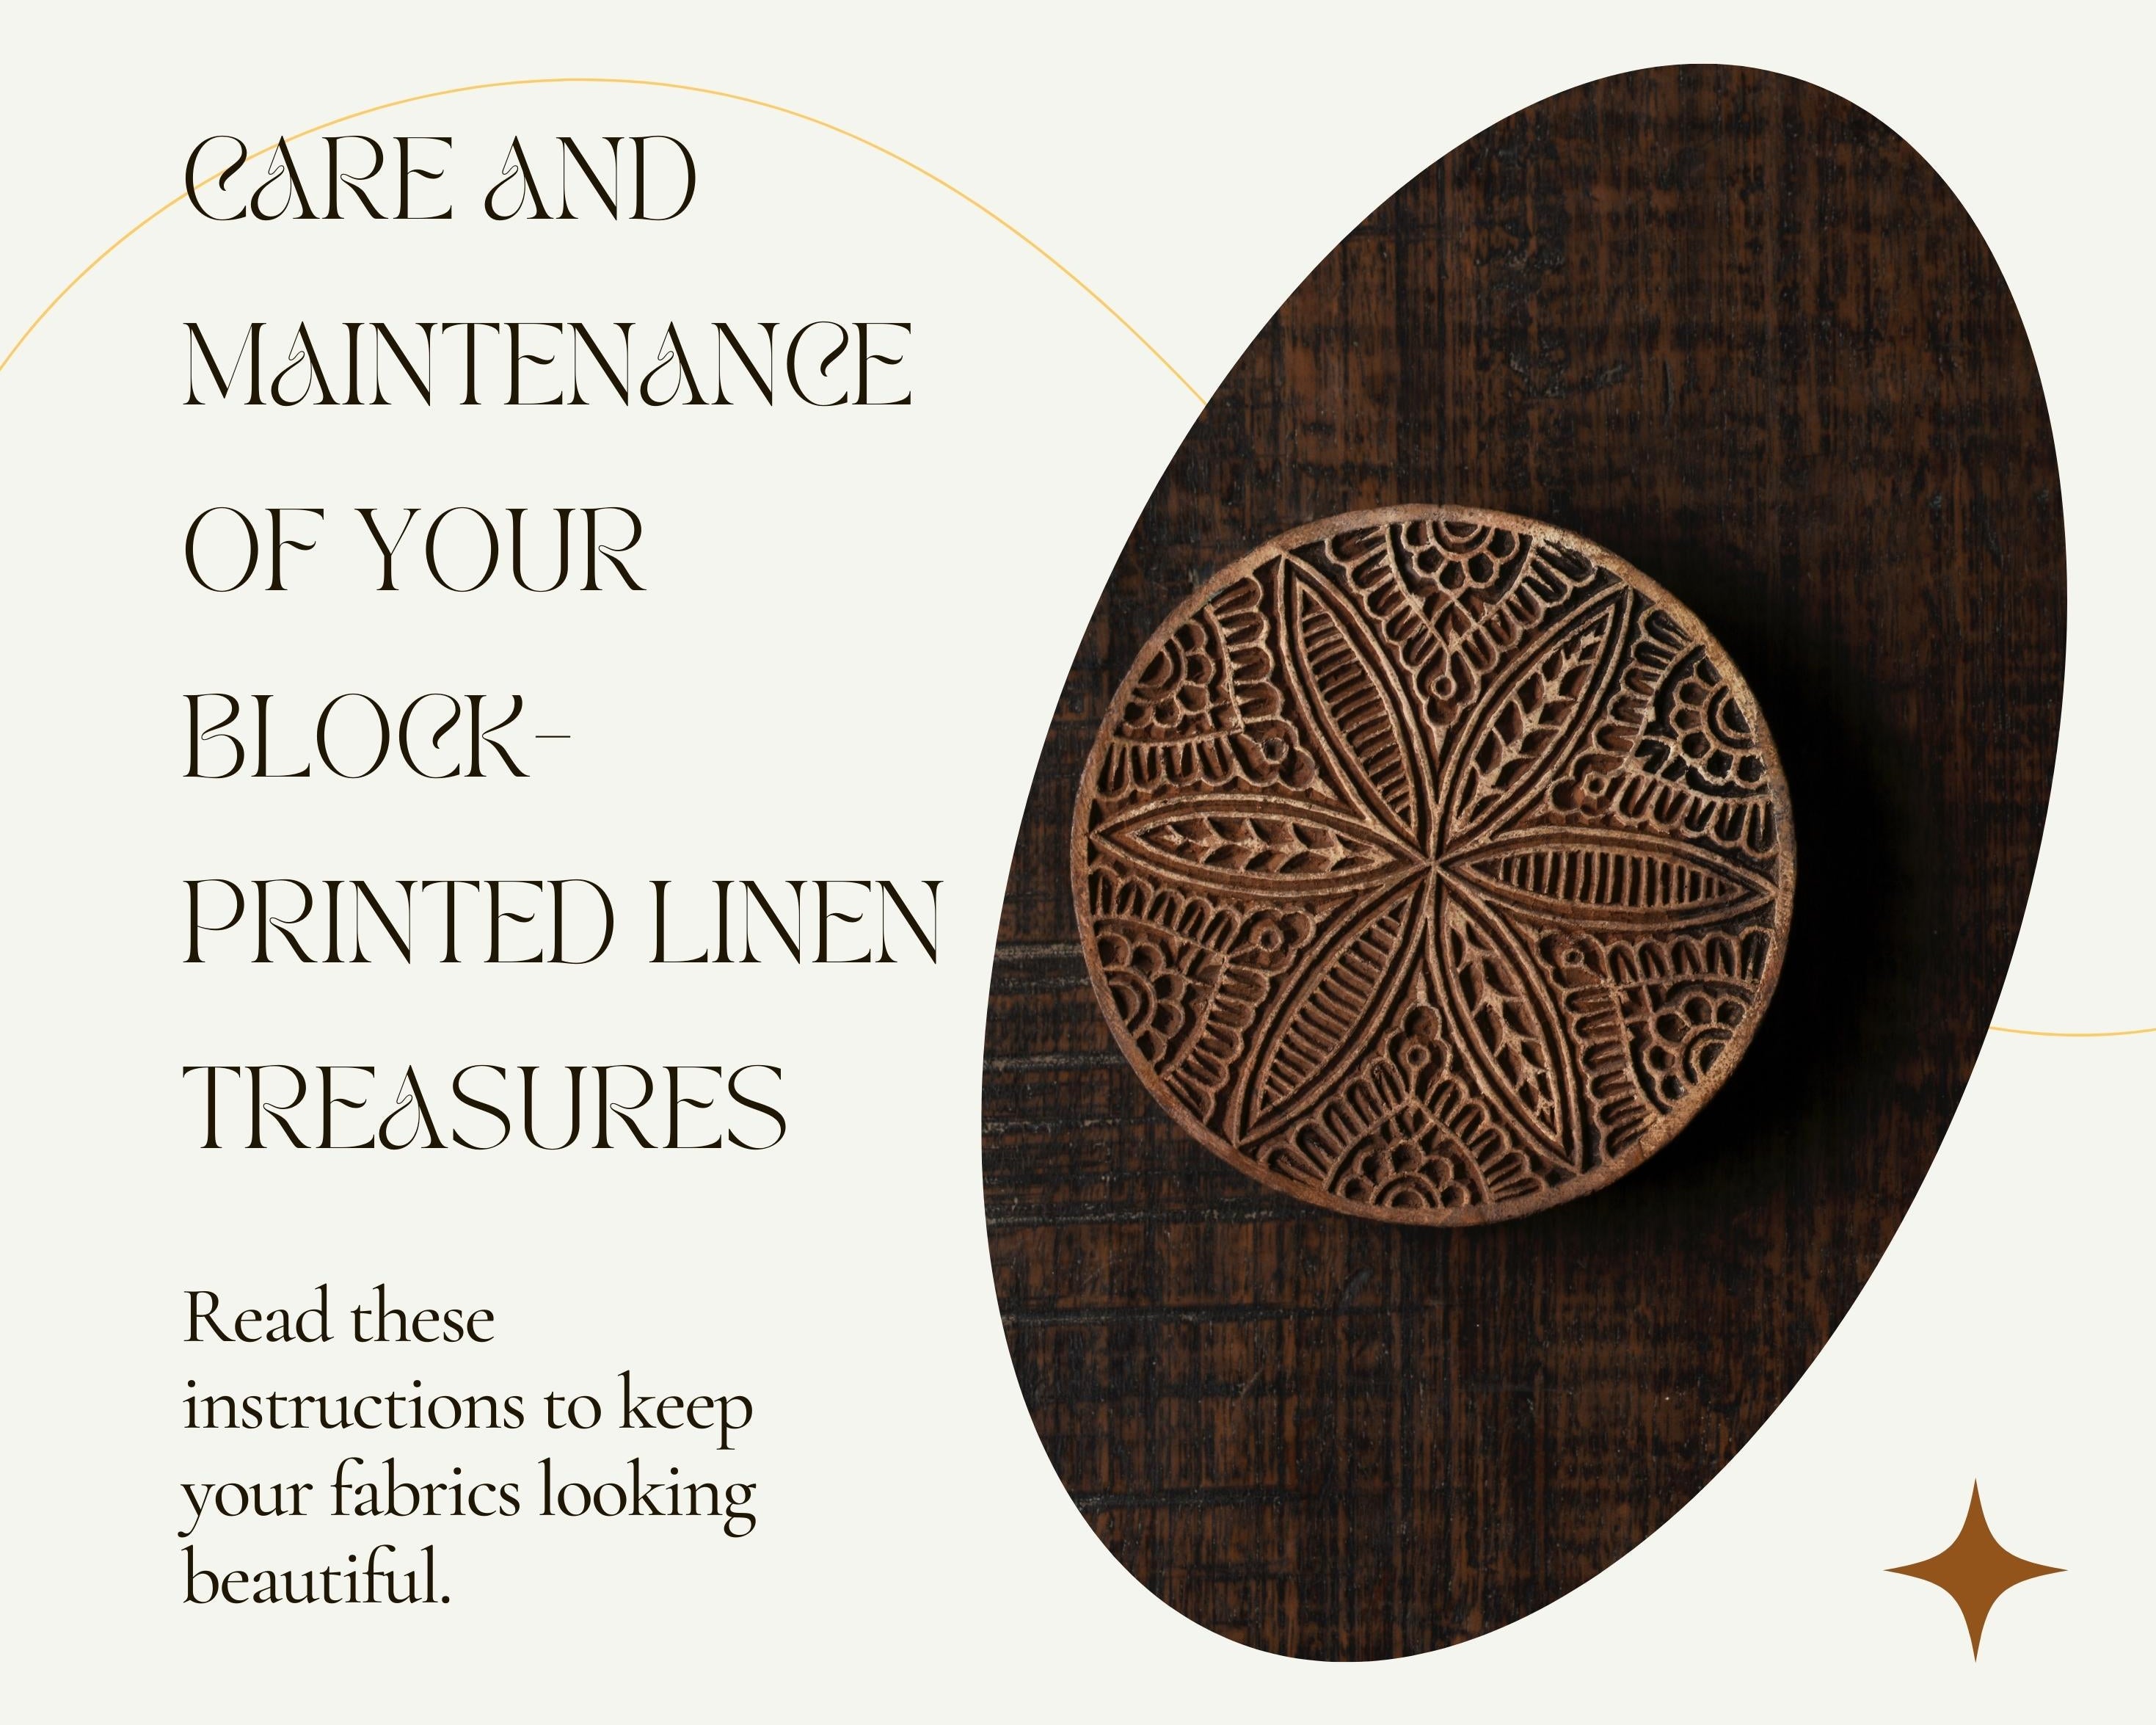 Care and Maintenance of Your Block-Printed Linen Treasures